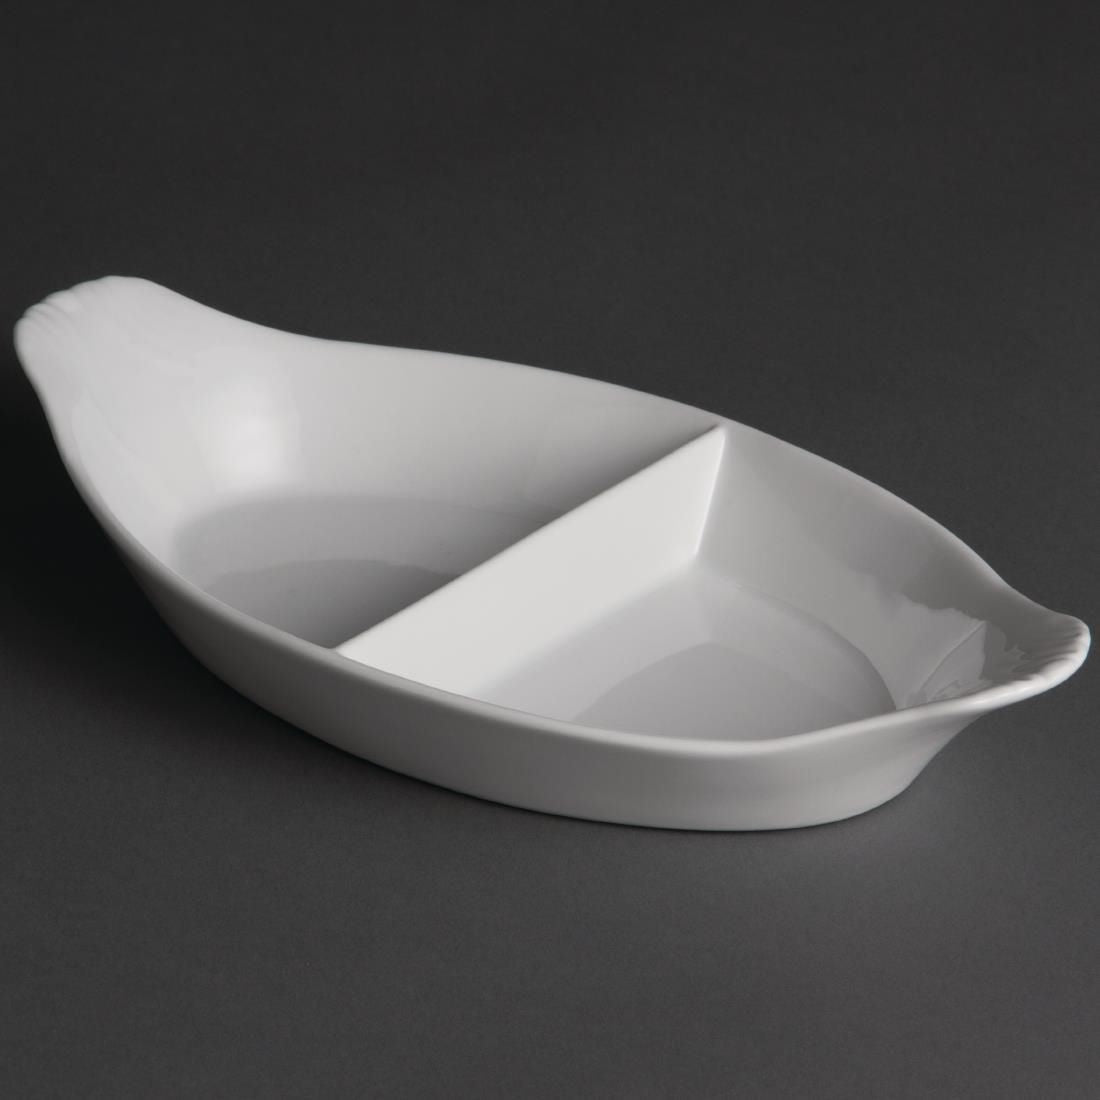 Y100 Olympia Divided Oval Eared Dishes 290x 160mm (Pack of 6)